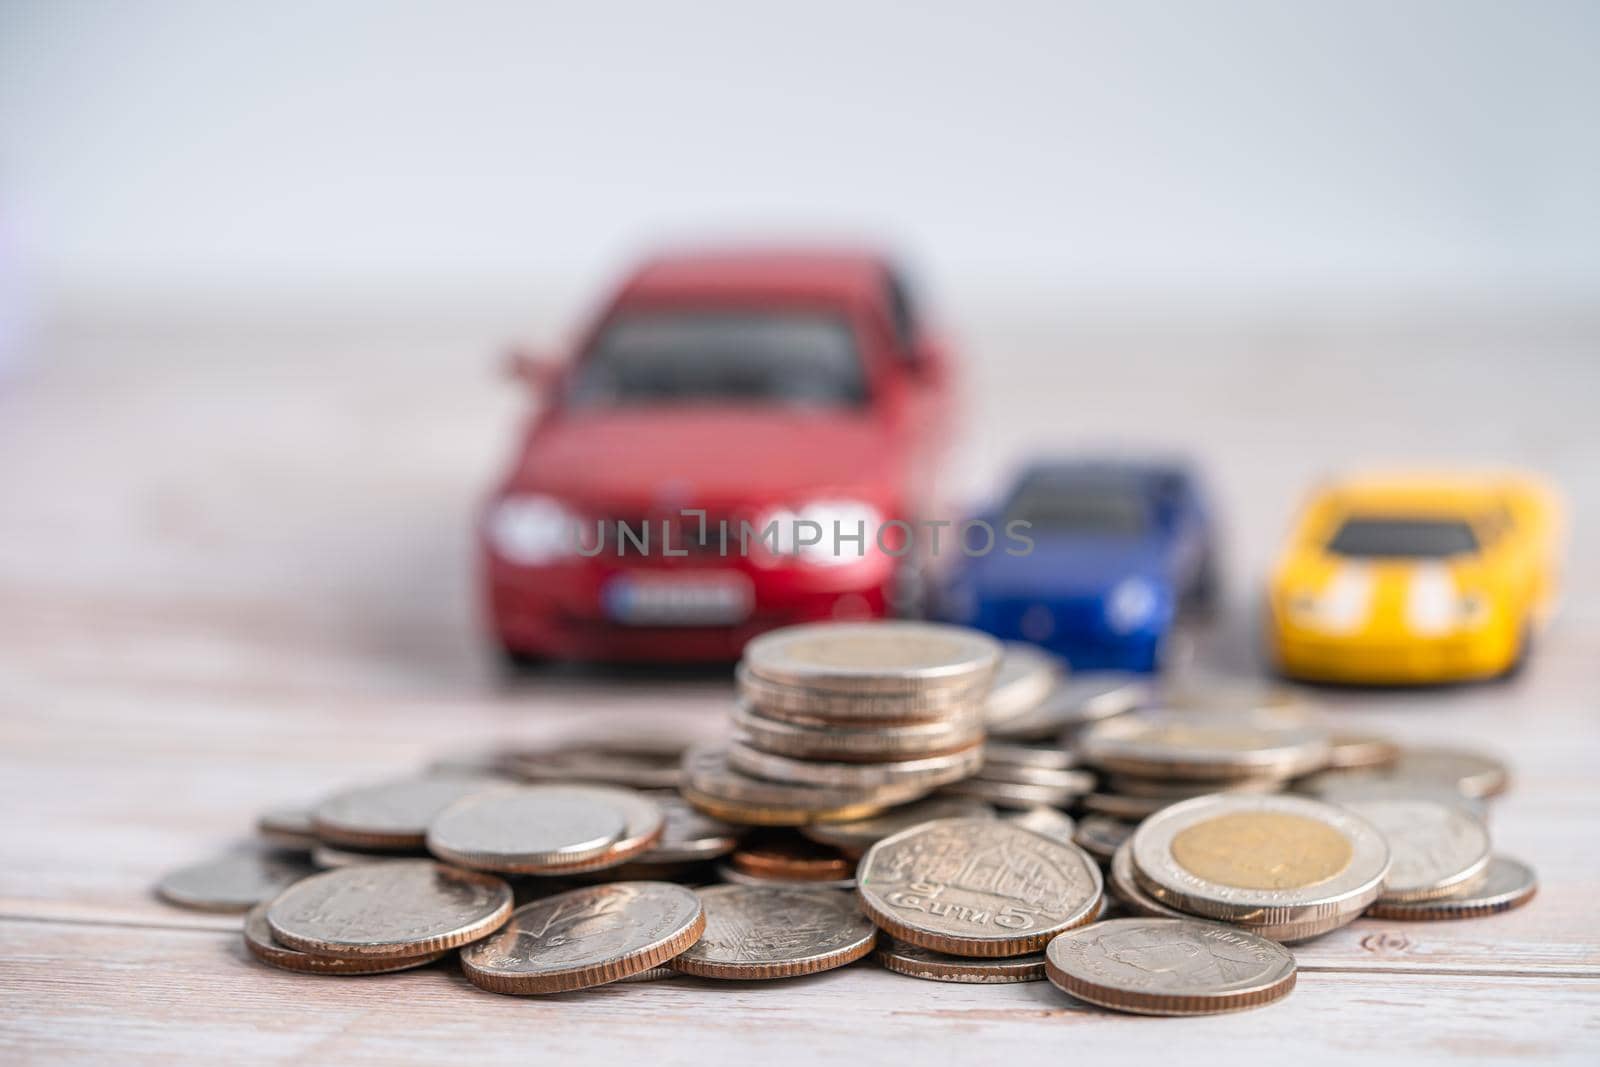 Car on coins background; Car loan, Finance, saving money, insurance and leasing time concepts.